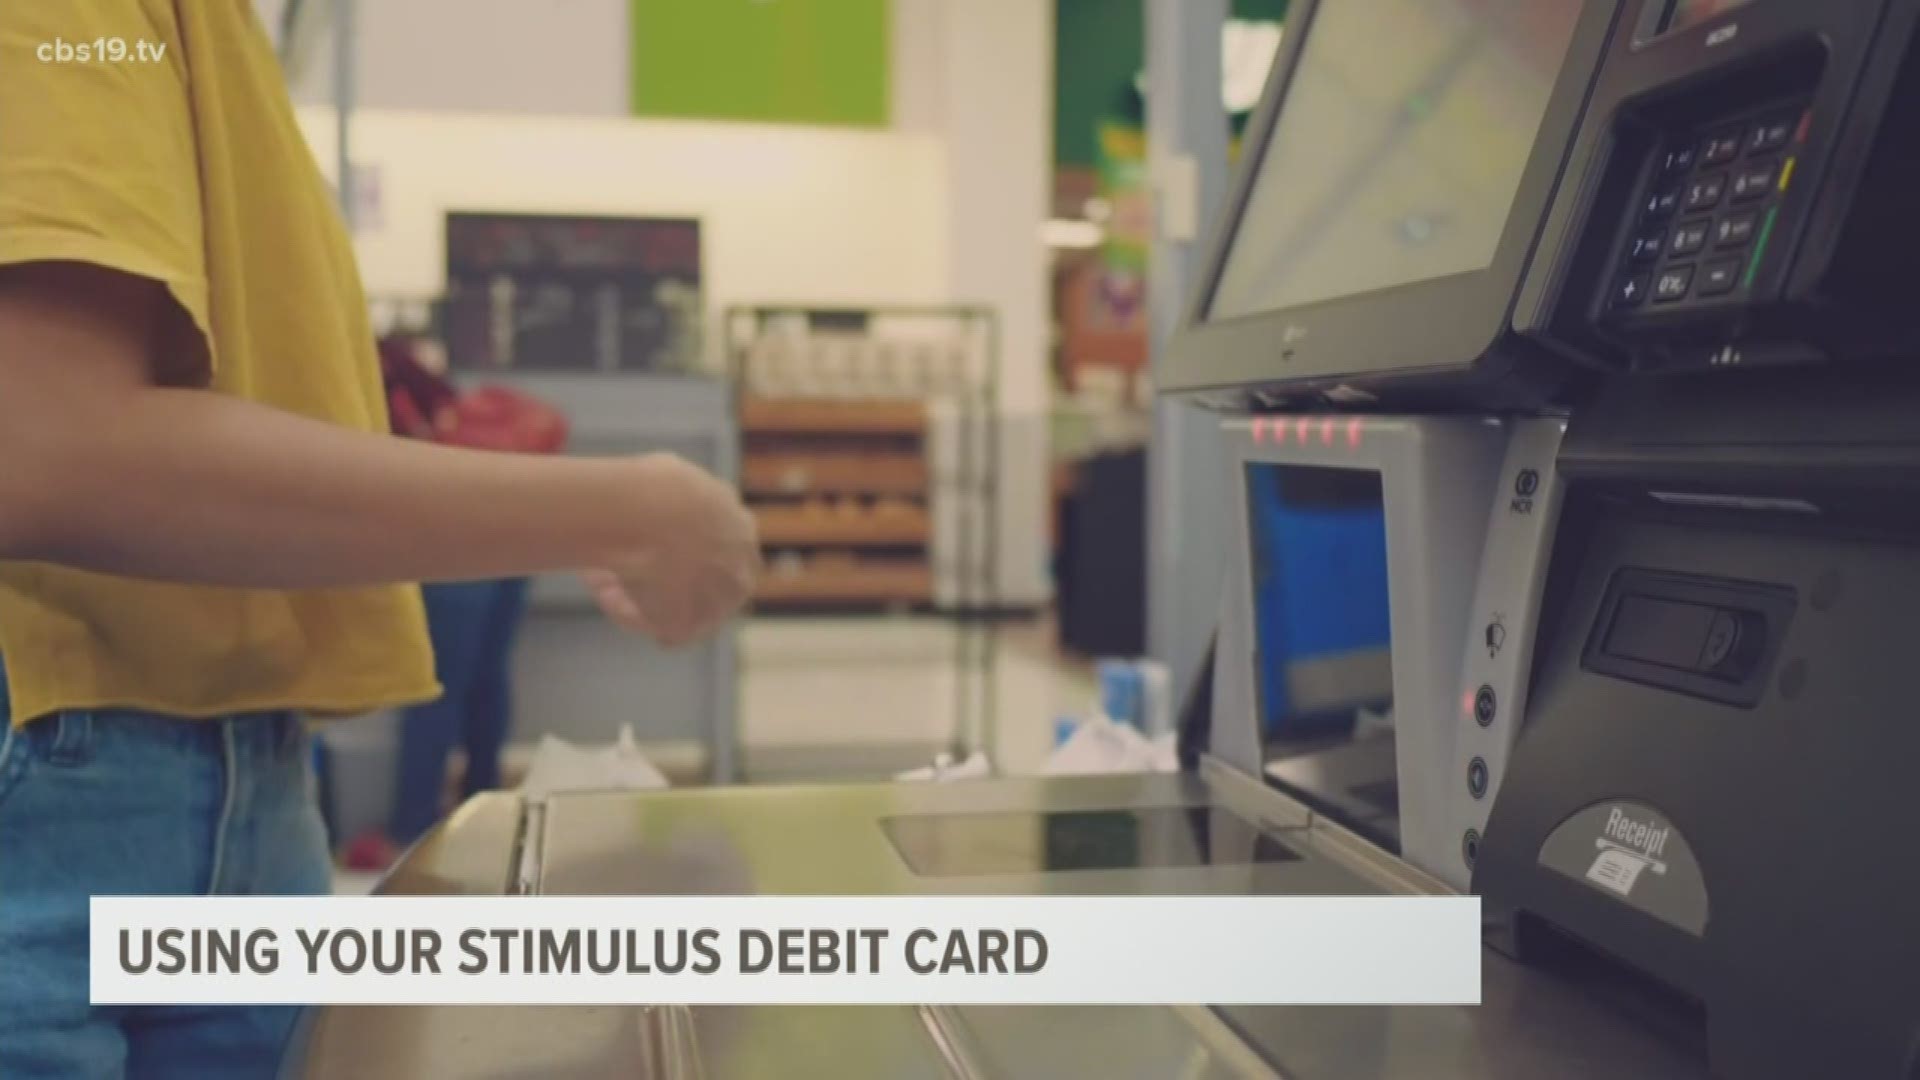 If you received a debit card with your federal stimulus money on it, you may have some questions on how to use it.